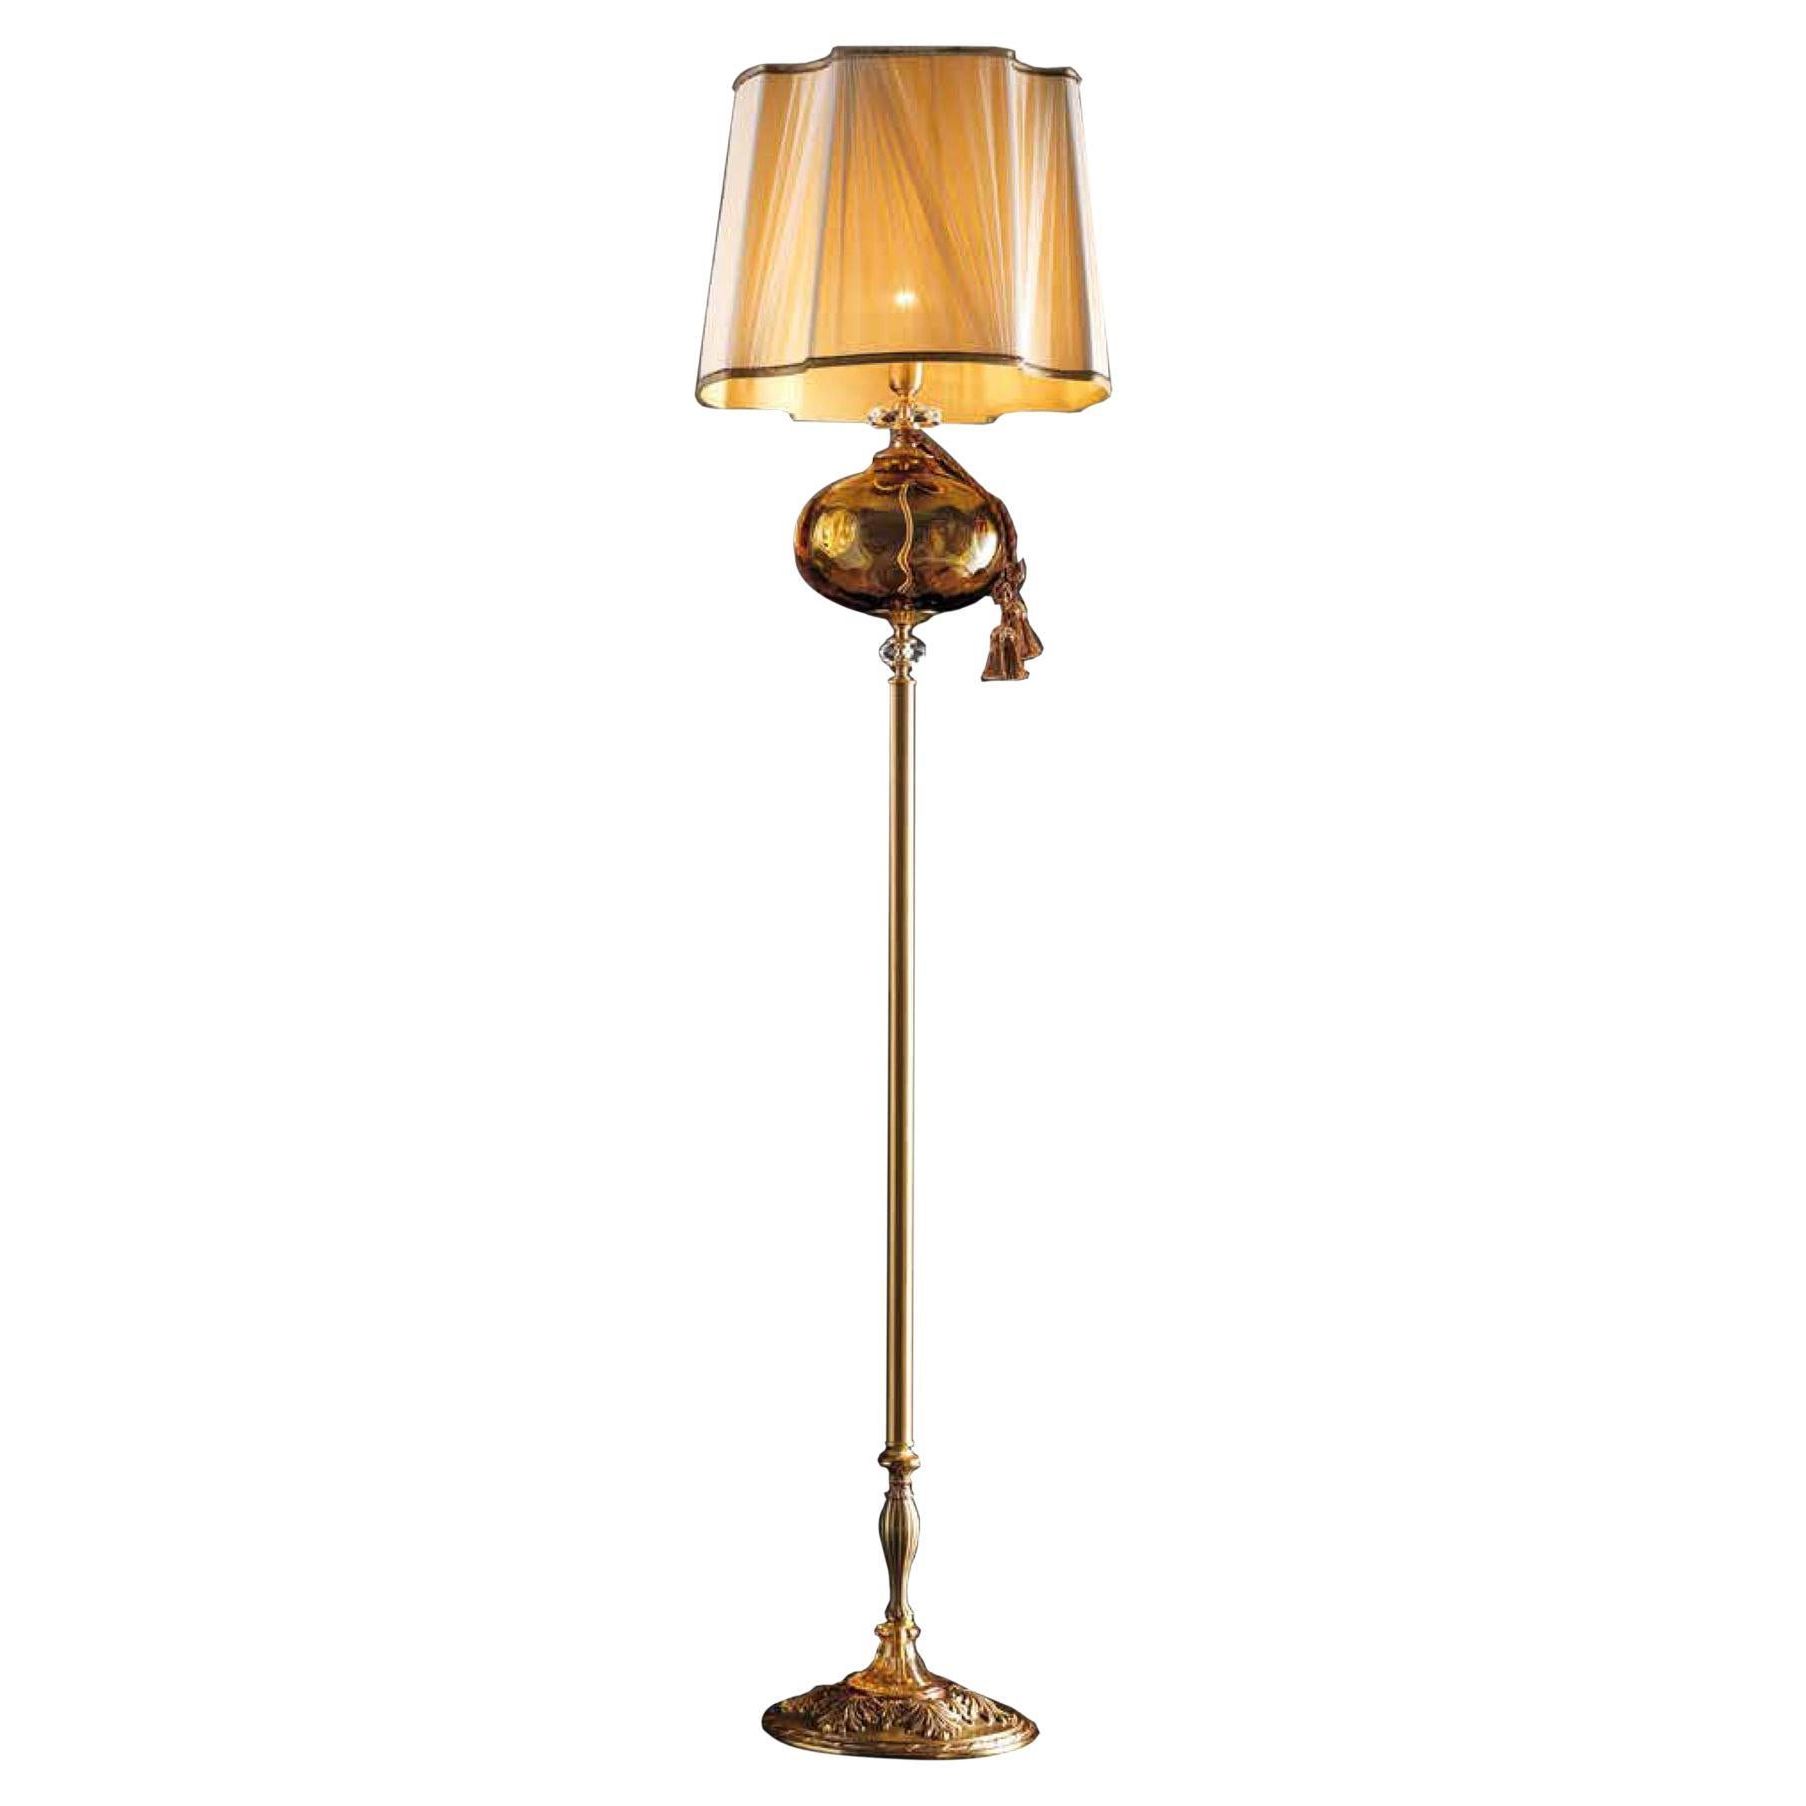 Fashionable Royal 1 Light Floor Lamp In French Gold Satin Brass Finishing And Amber  Crystals For Sale At 1stdibs With Regard To Satin Brass Floor Lamps (View 14 of 15)